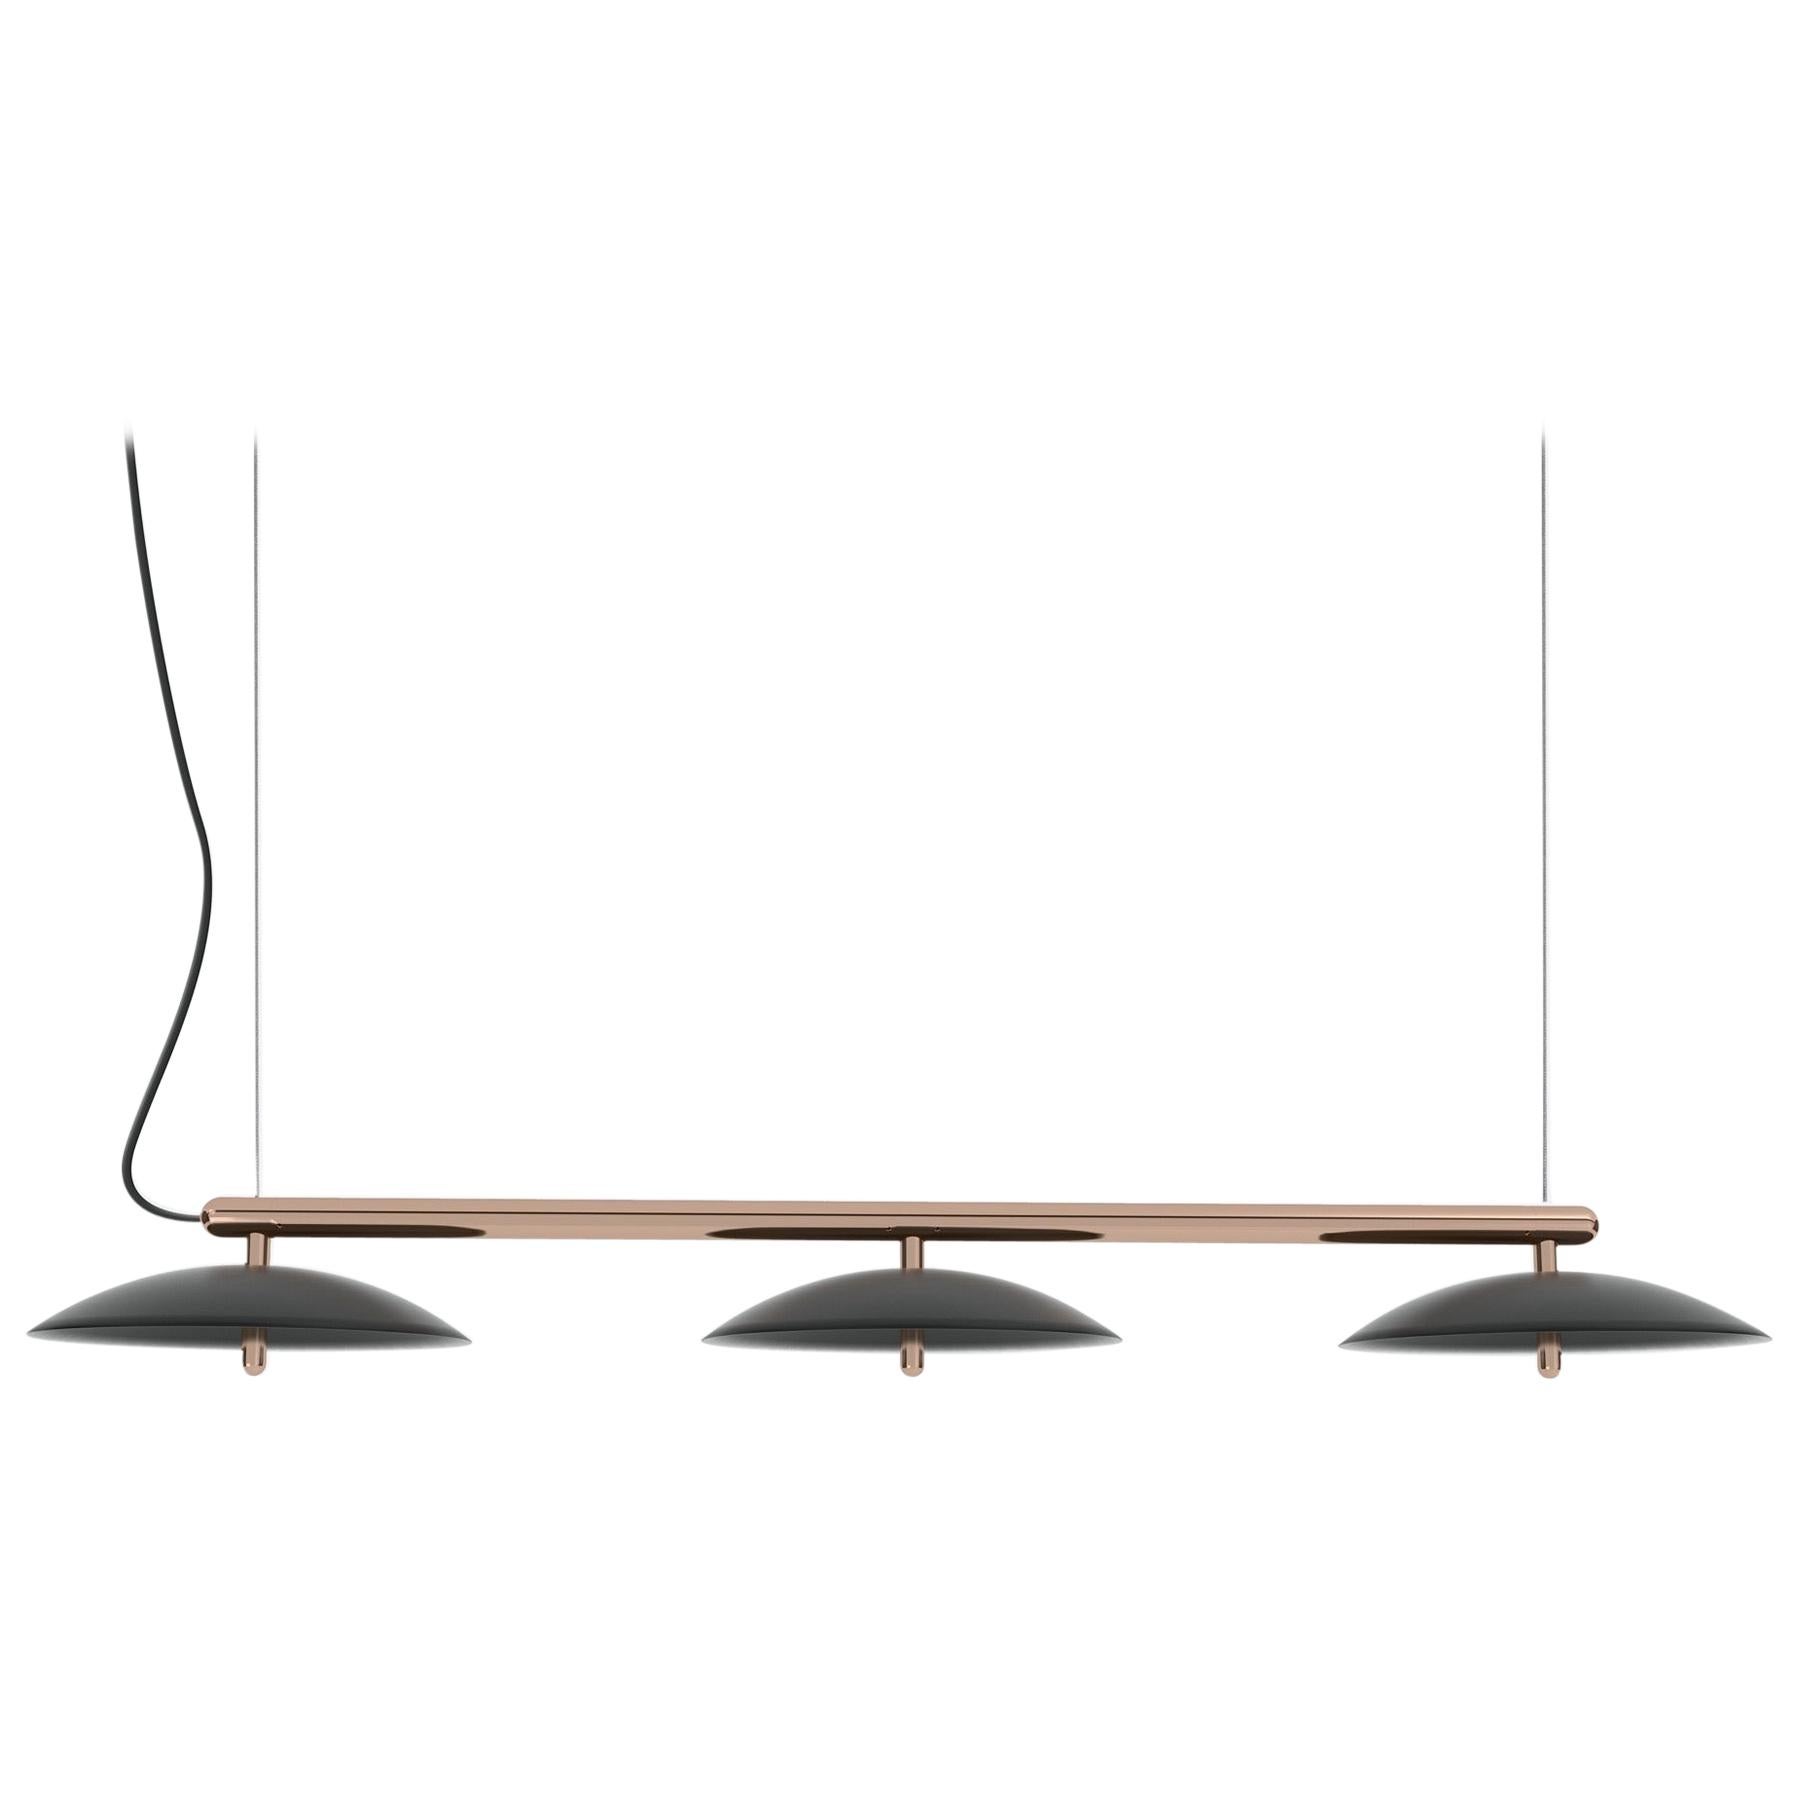 Signal Linear Pendant, Souda, Medium, Black & Copper, Made to Order For Sale